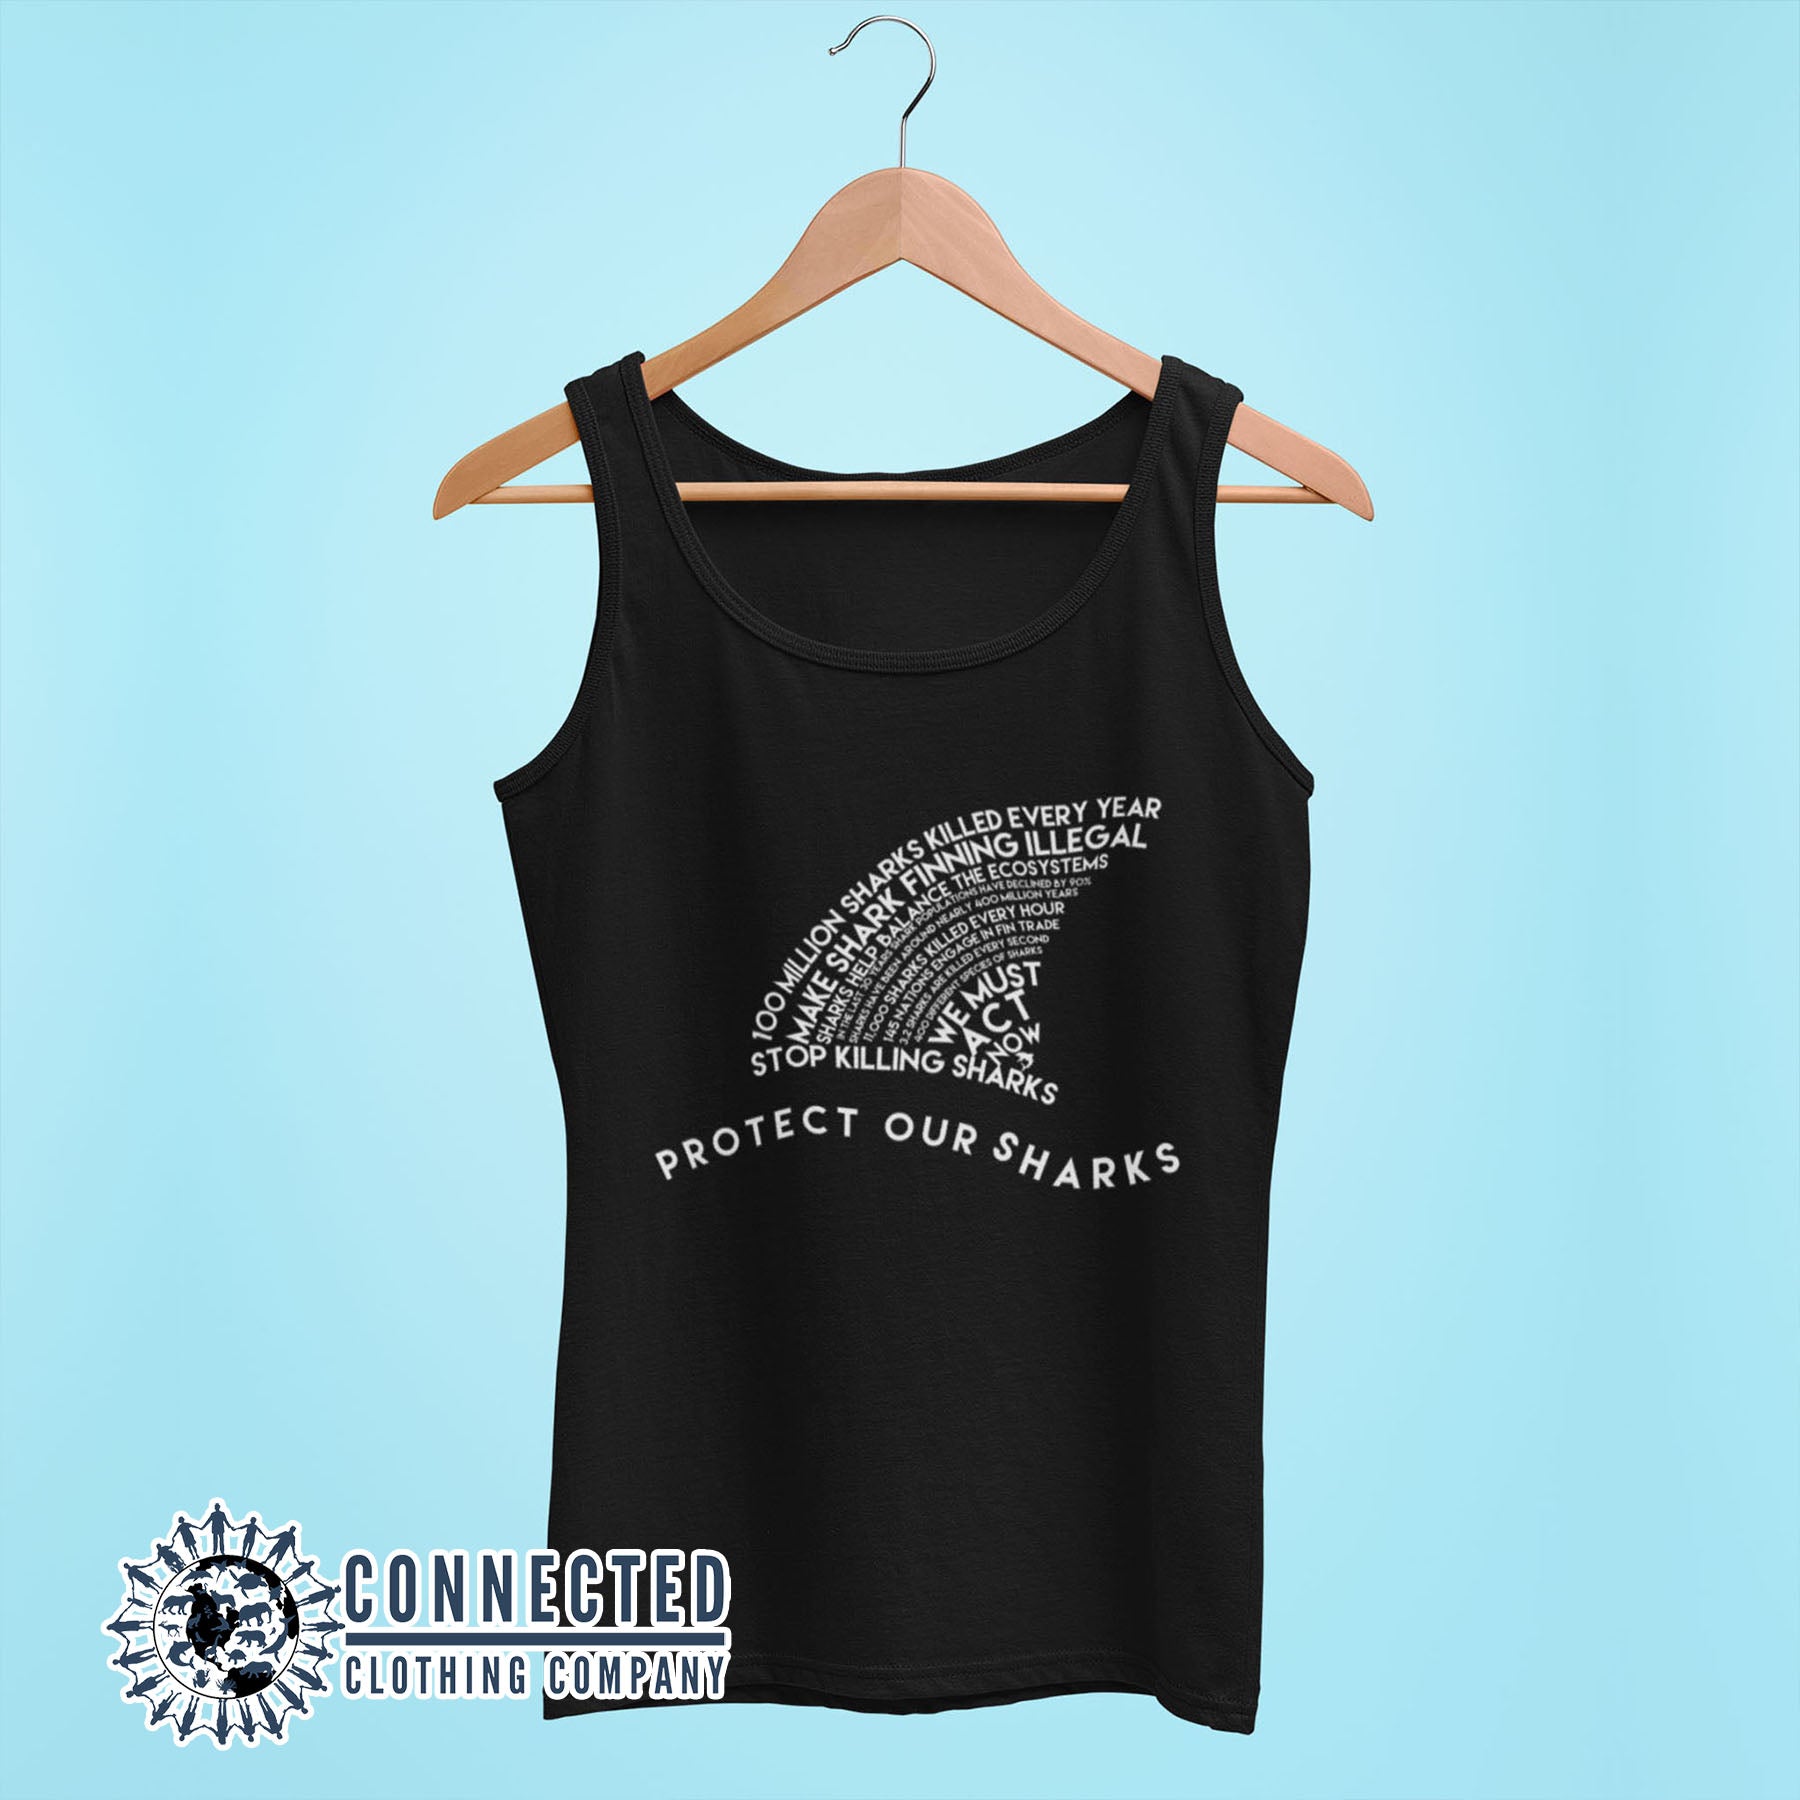 Black Protect Our Sharks Women's Relaxed Tank Top - sweetsherriloudesigns - Ethically and Sustainably Made - 10% of profits donated to Oceana shark conservation